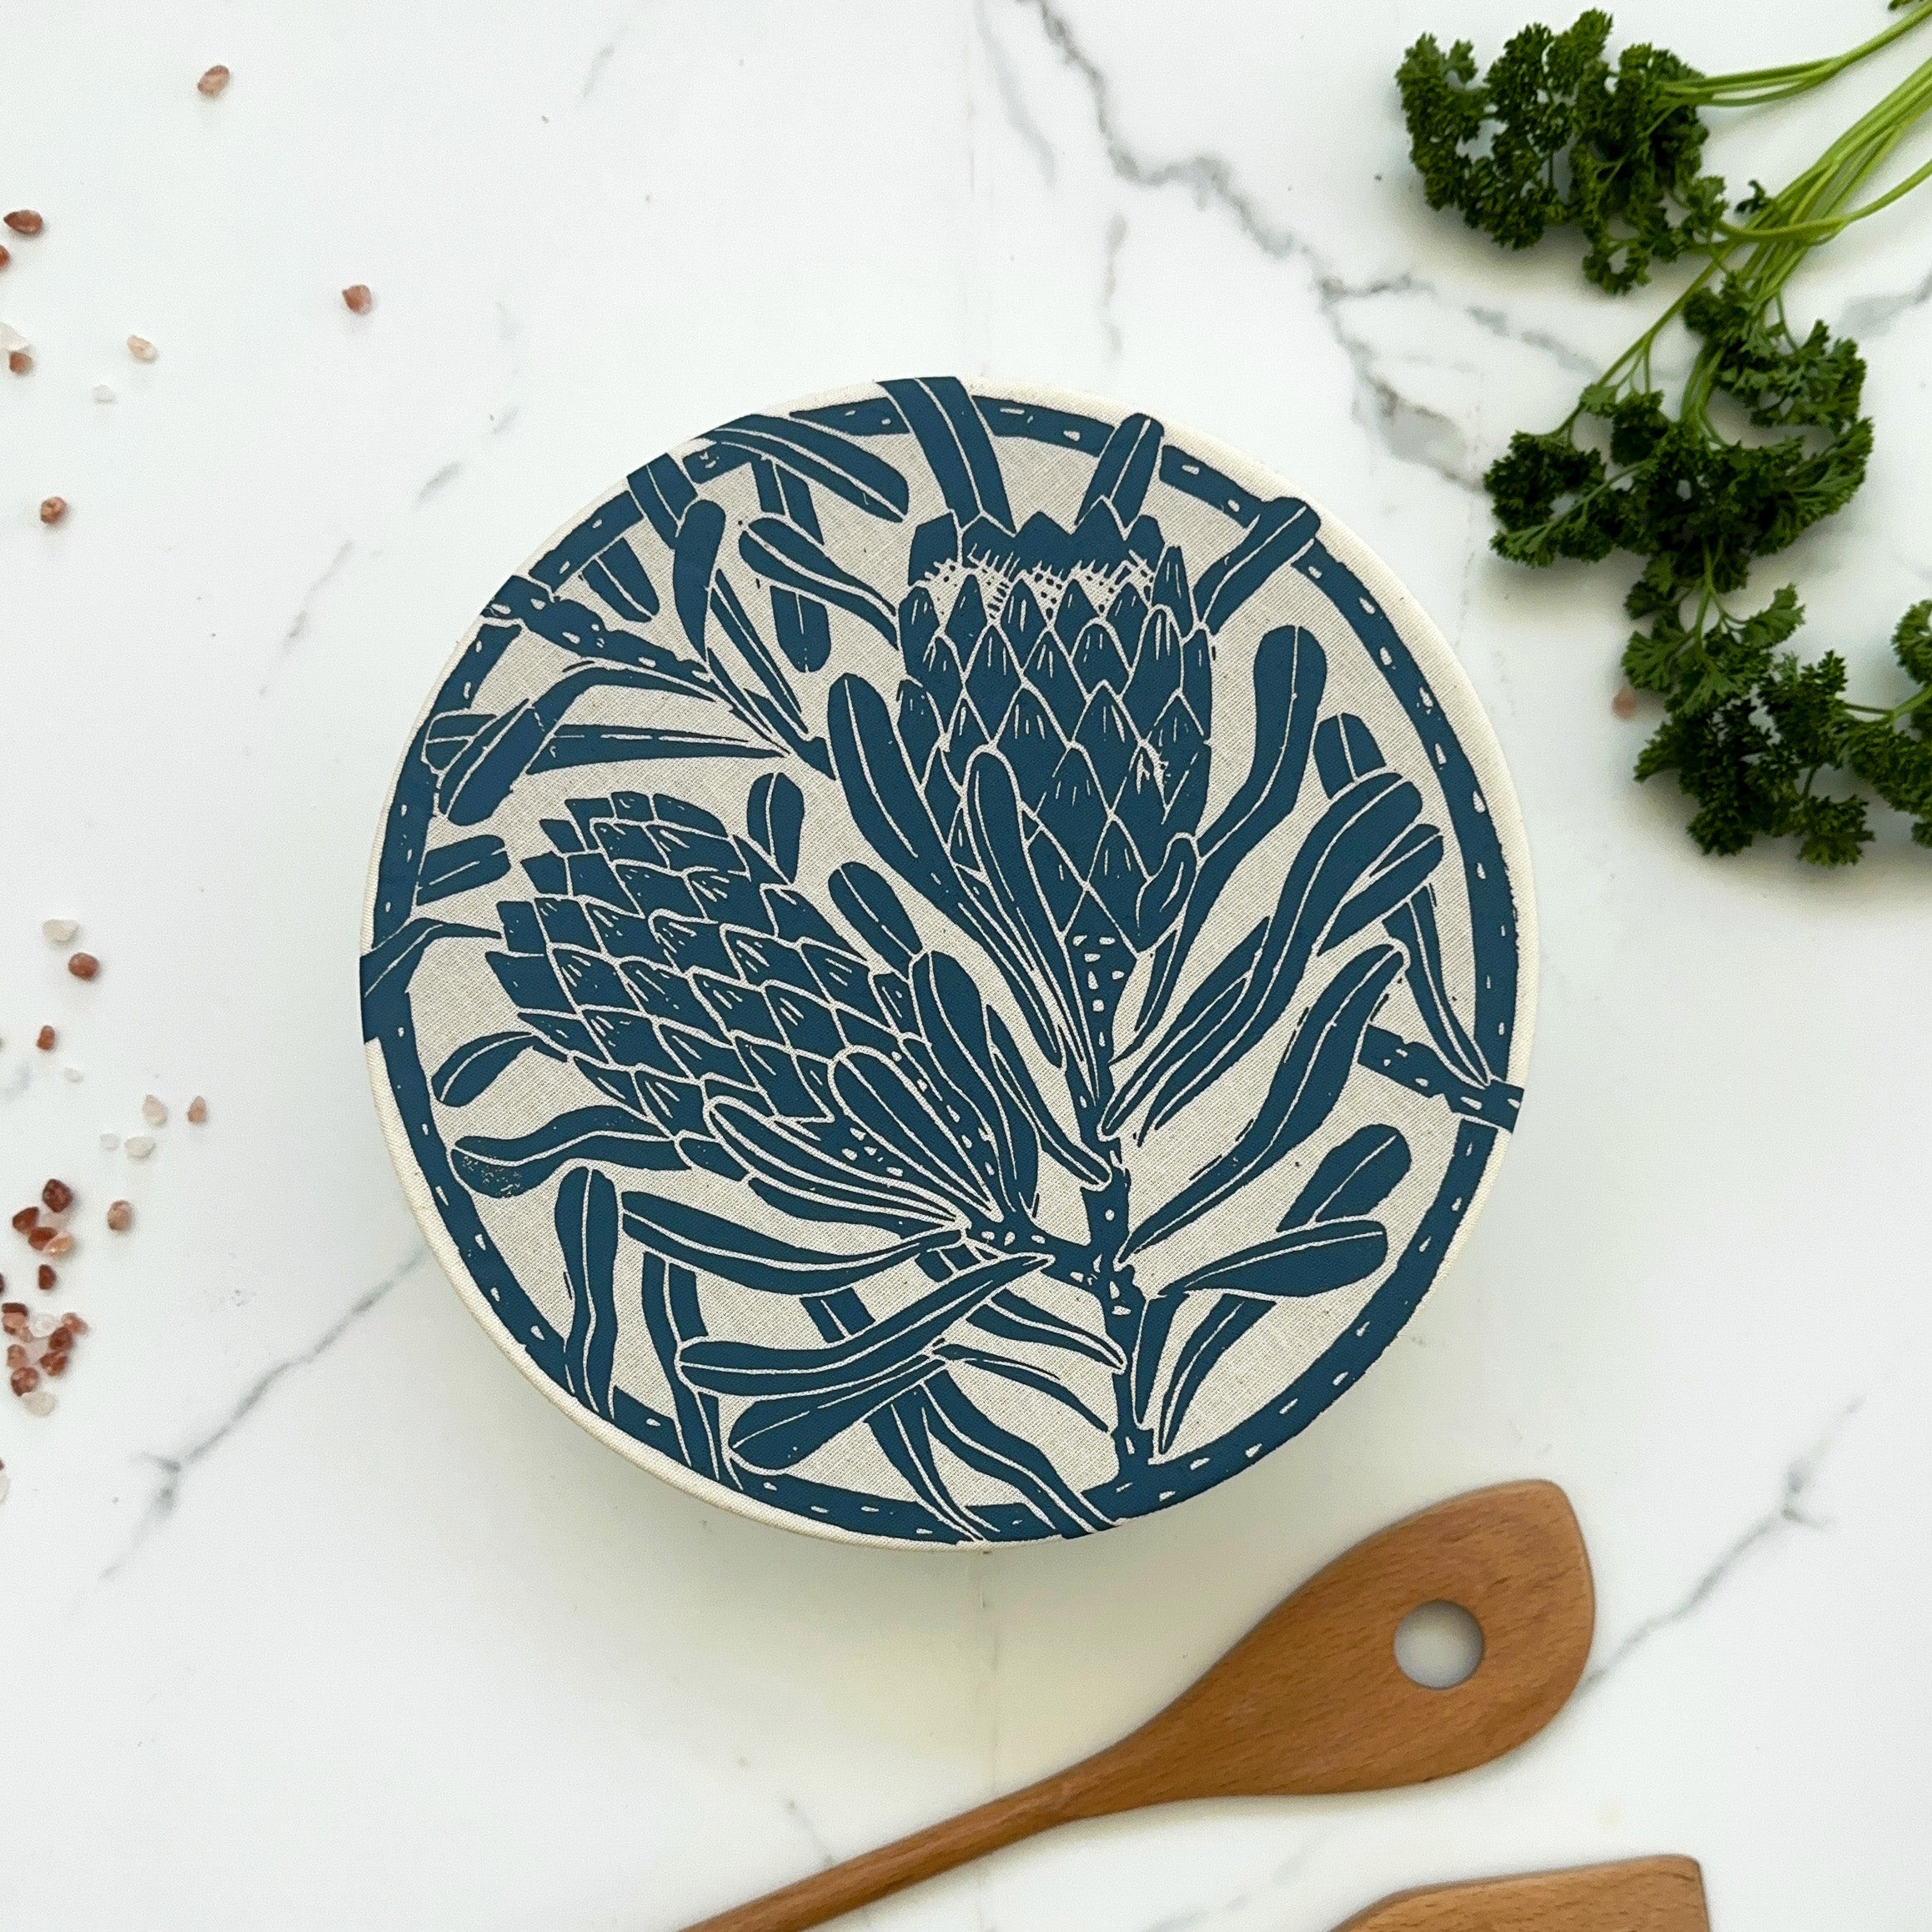 Dish and Bowl Cover Medium Protea Print | handy everyday cover